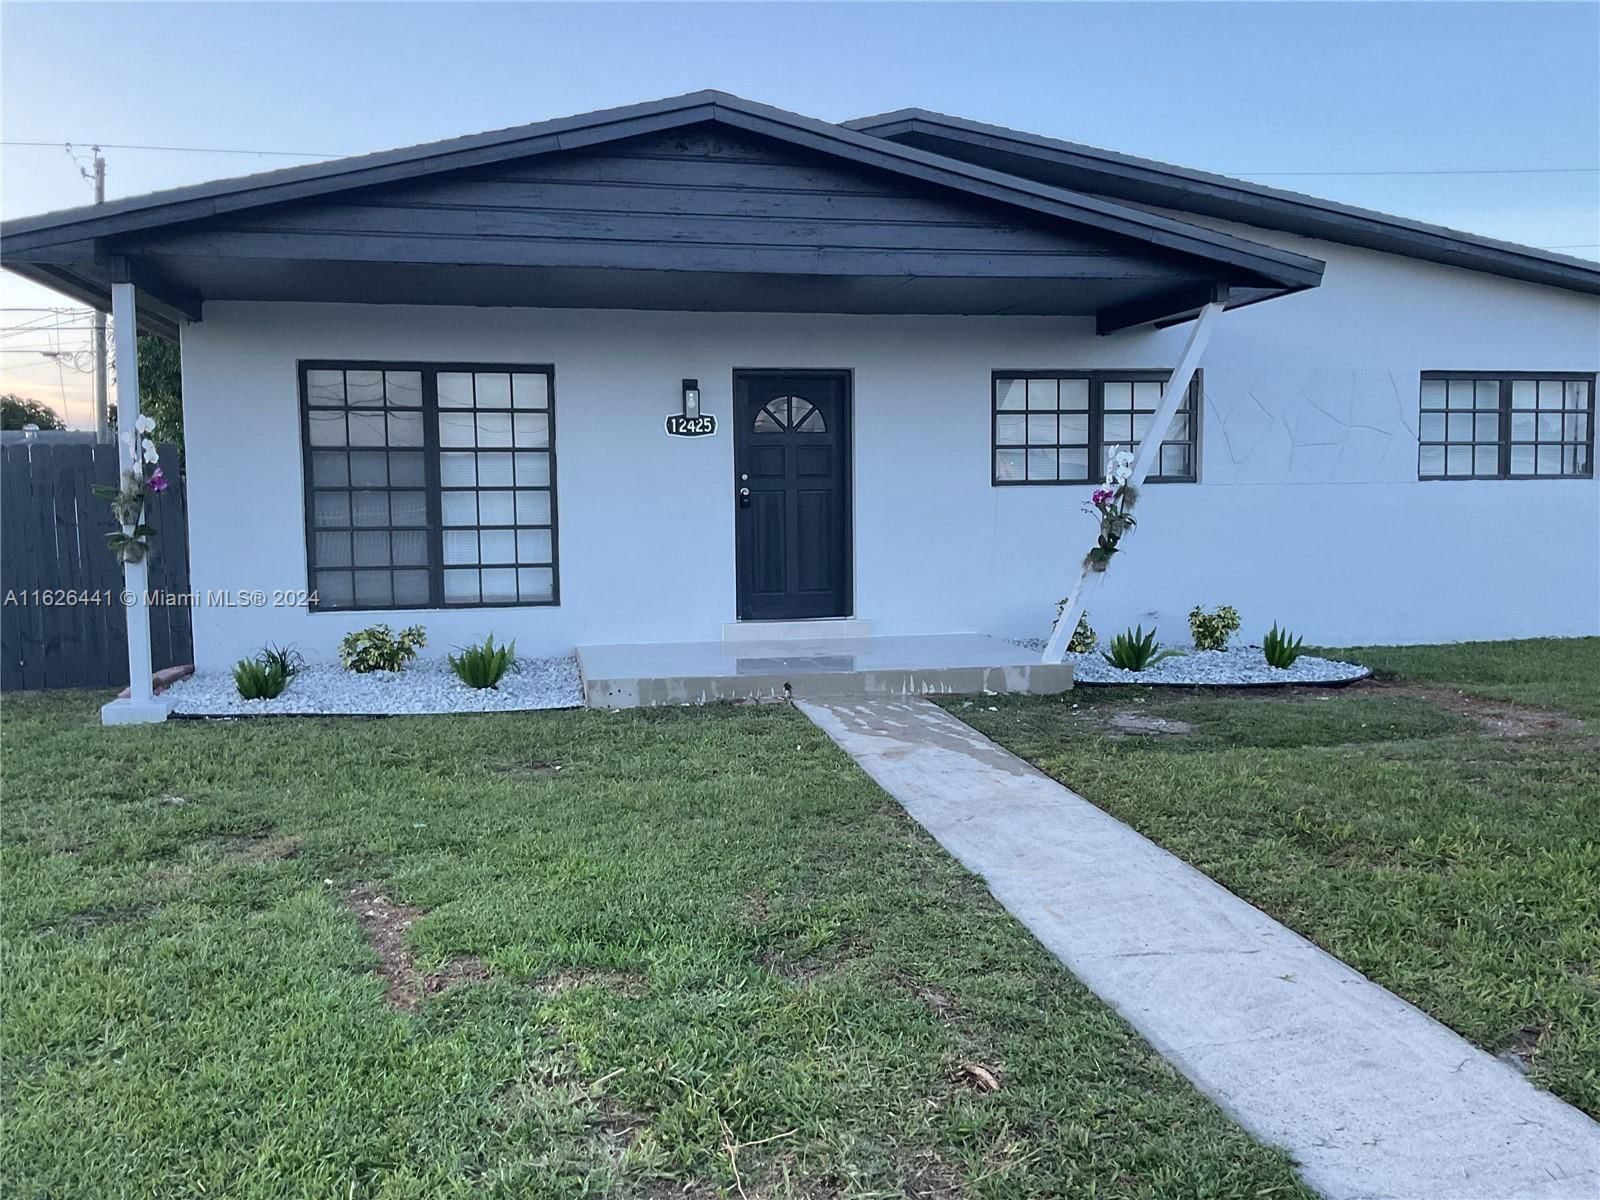 Real estate property located at 12425 188th Ter, Miami-Dade County, SO MIAMI HEIGHTS ADDN D, Miami, FL